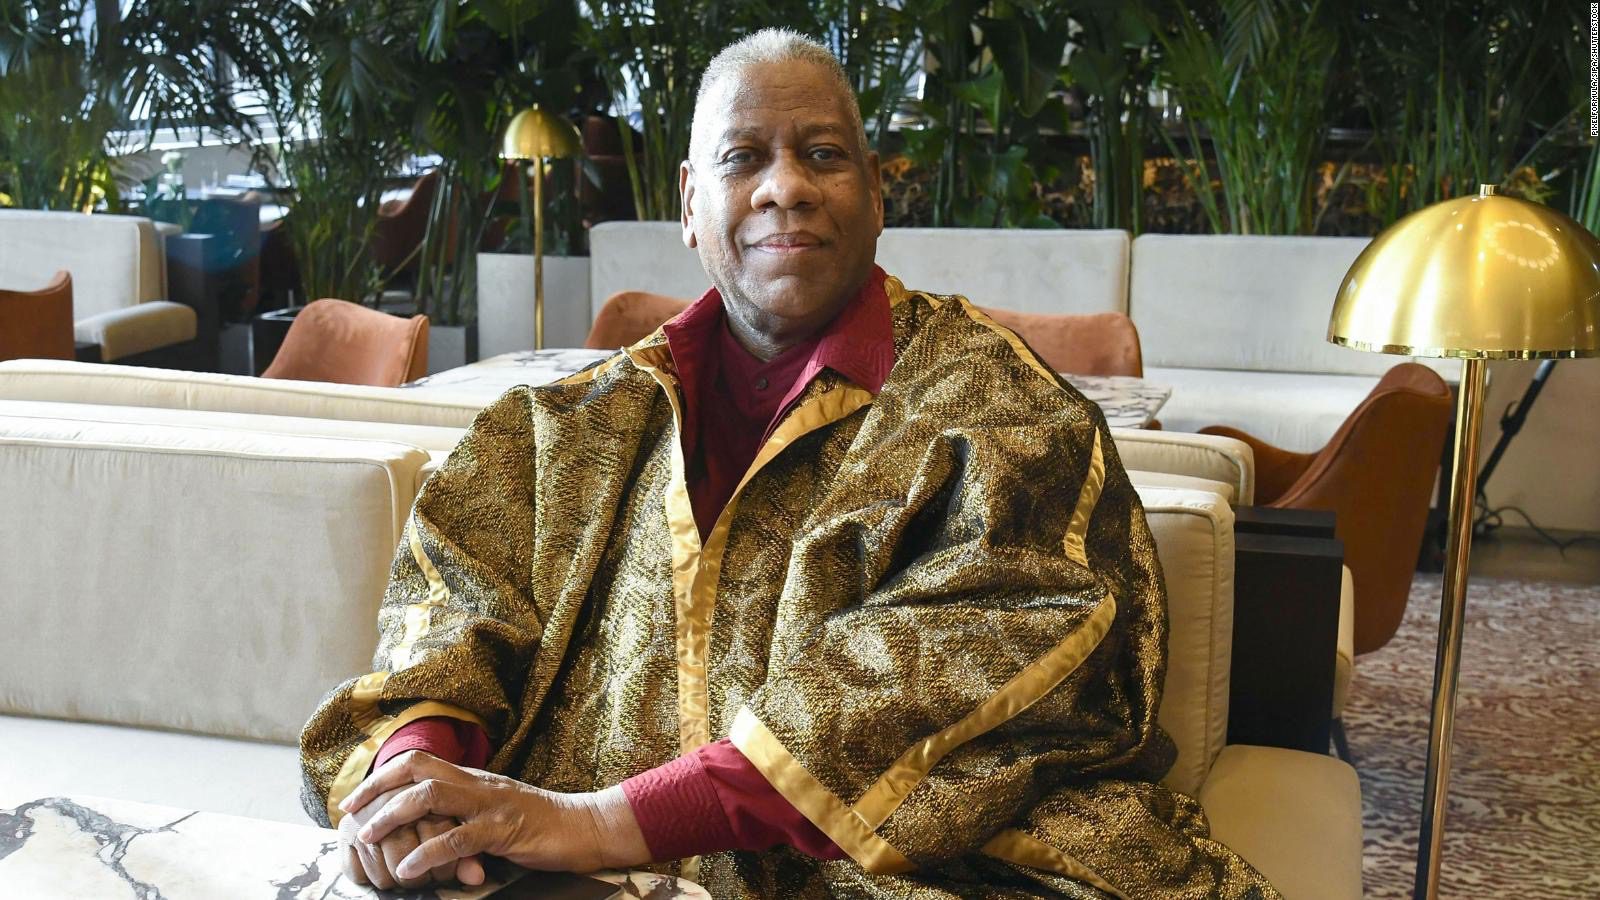 Andre Leon Talley 2